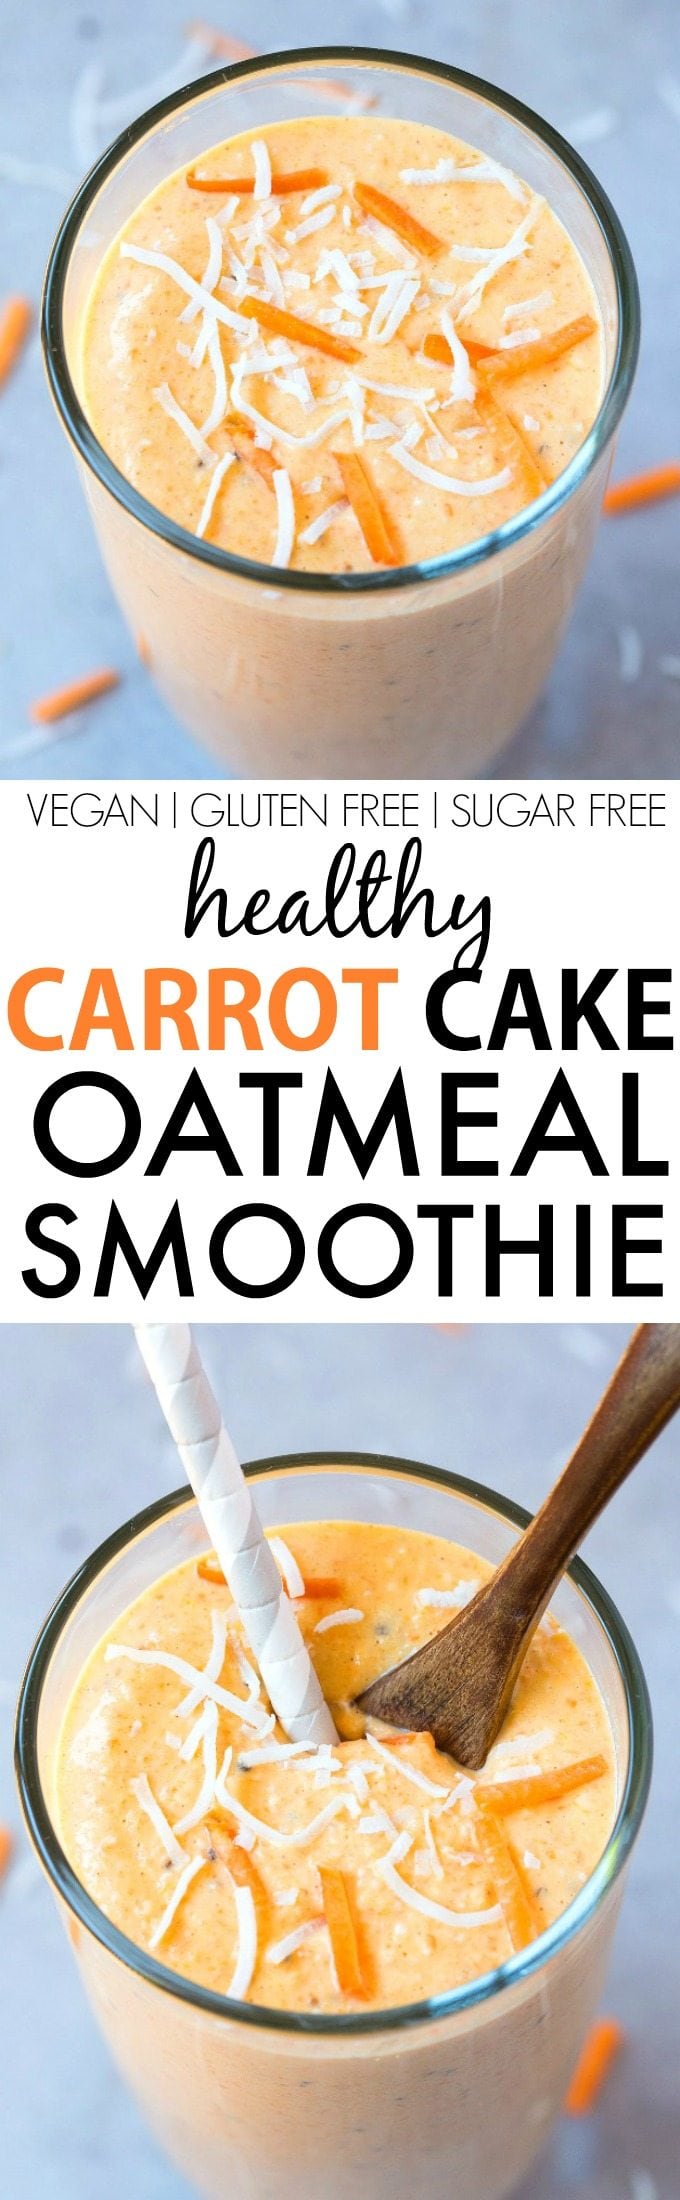 Healthy Carrot Cake Oatmeal Smoothie (V, GF, DF)- Thick, creamy, filling, satisfying and loaded with nutrients, it's like eating carrot cake in smoothie form- Packed with protein, fiber and completely sugar-free! {vegan, gluten free, dairy free recipe}- thebigmansworld.com